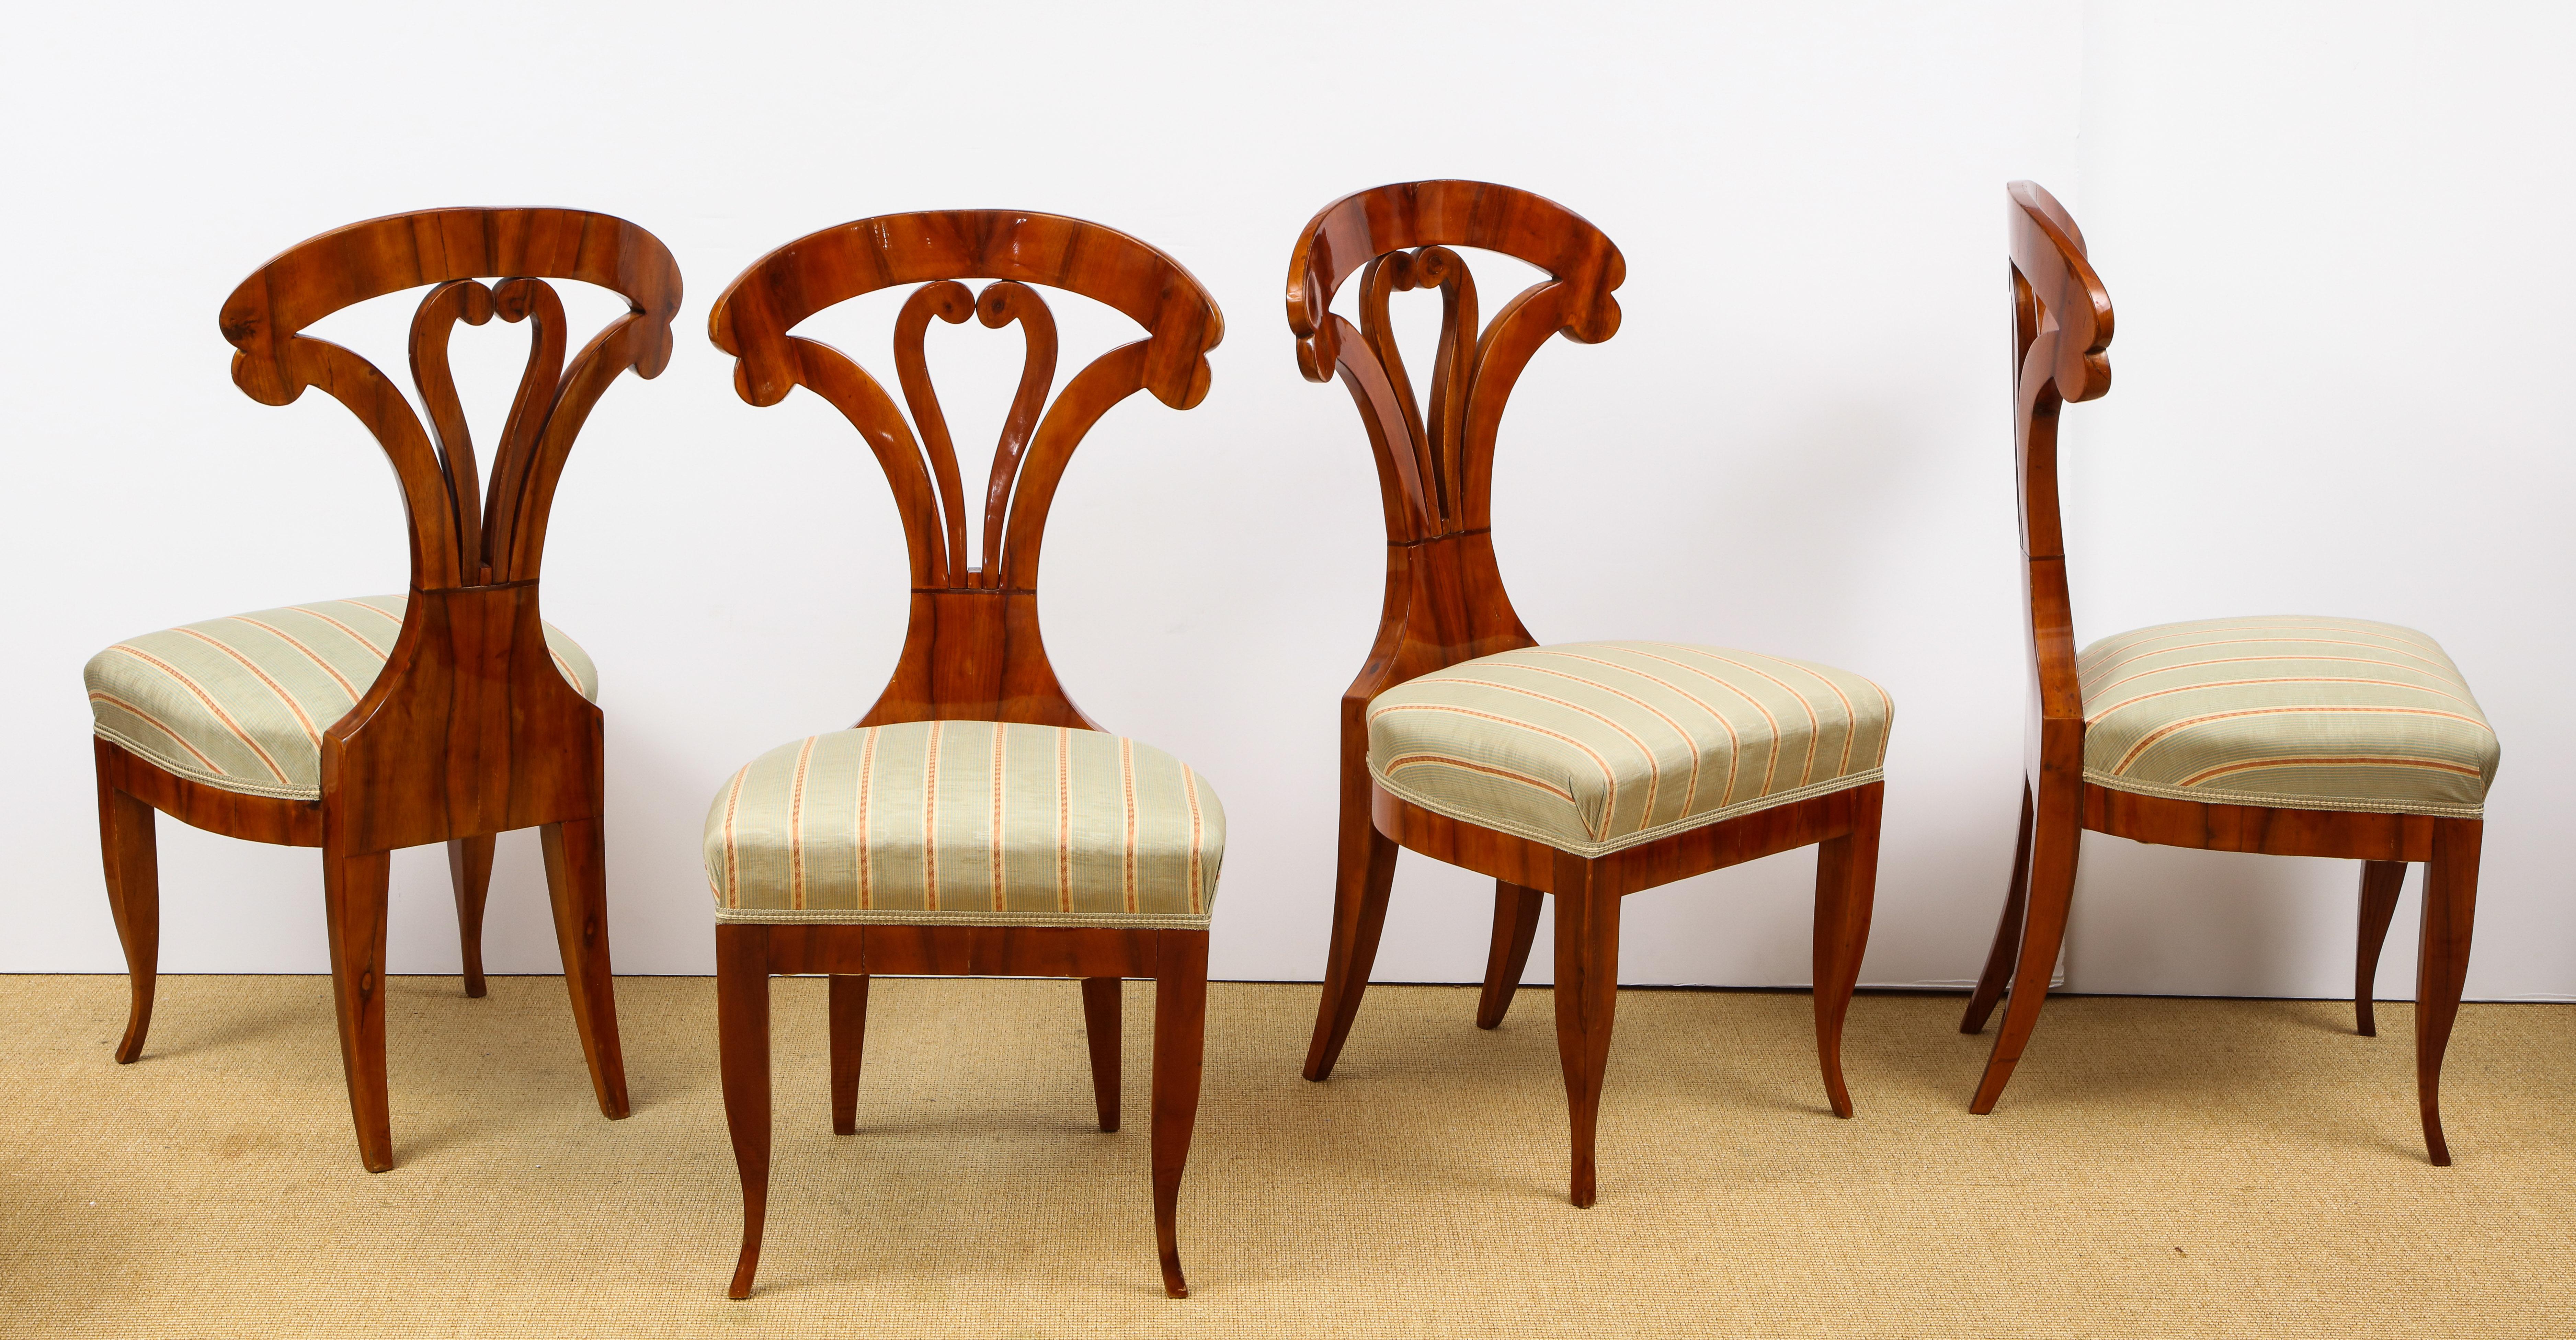 Each walnut veneered chair with intricately stylized back over an upholstered seat supported by a similarly veneered rail and 4 stylized legs.
  